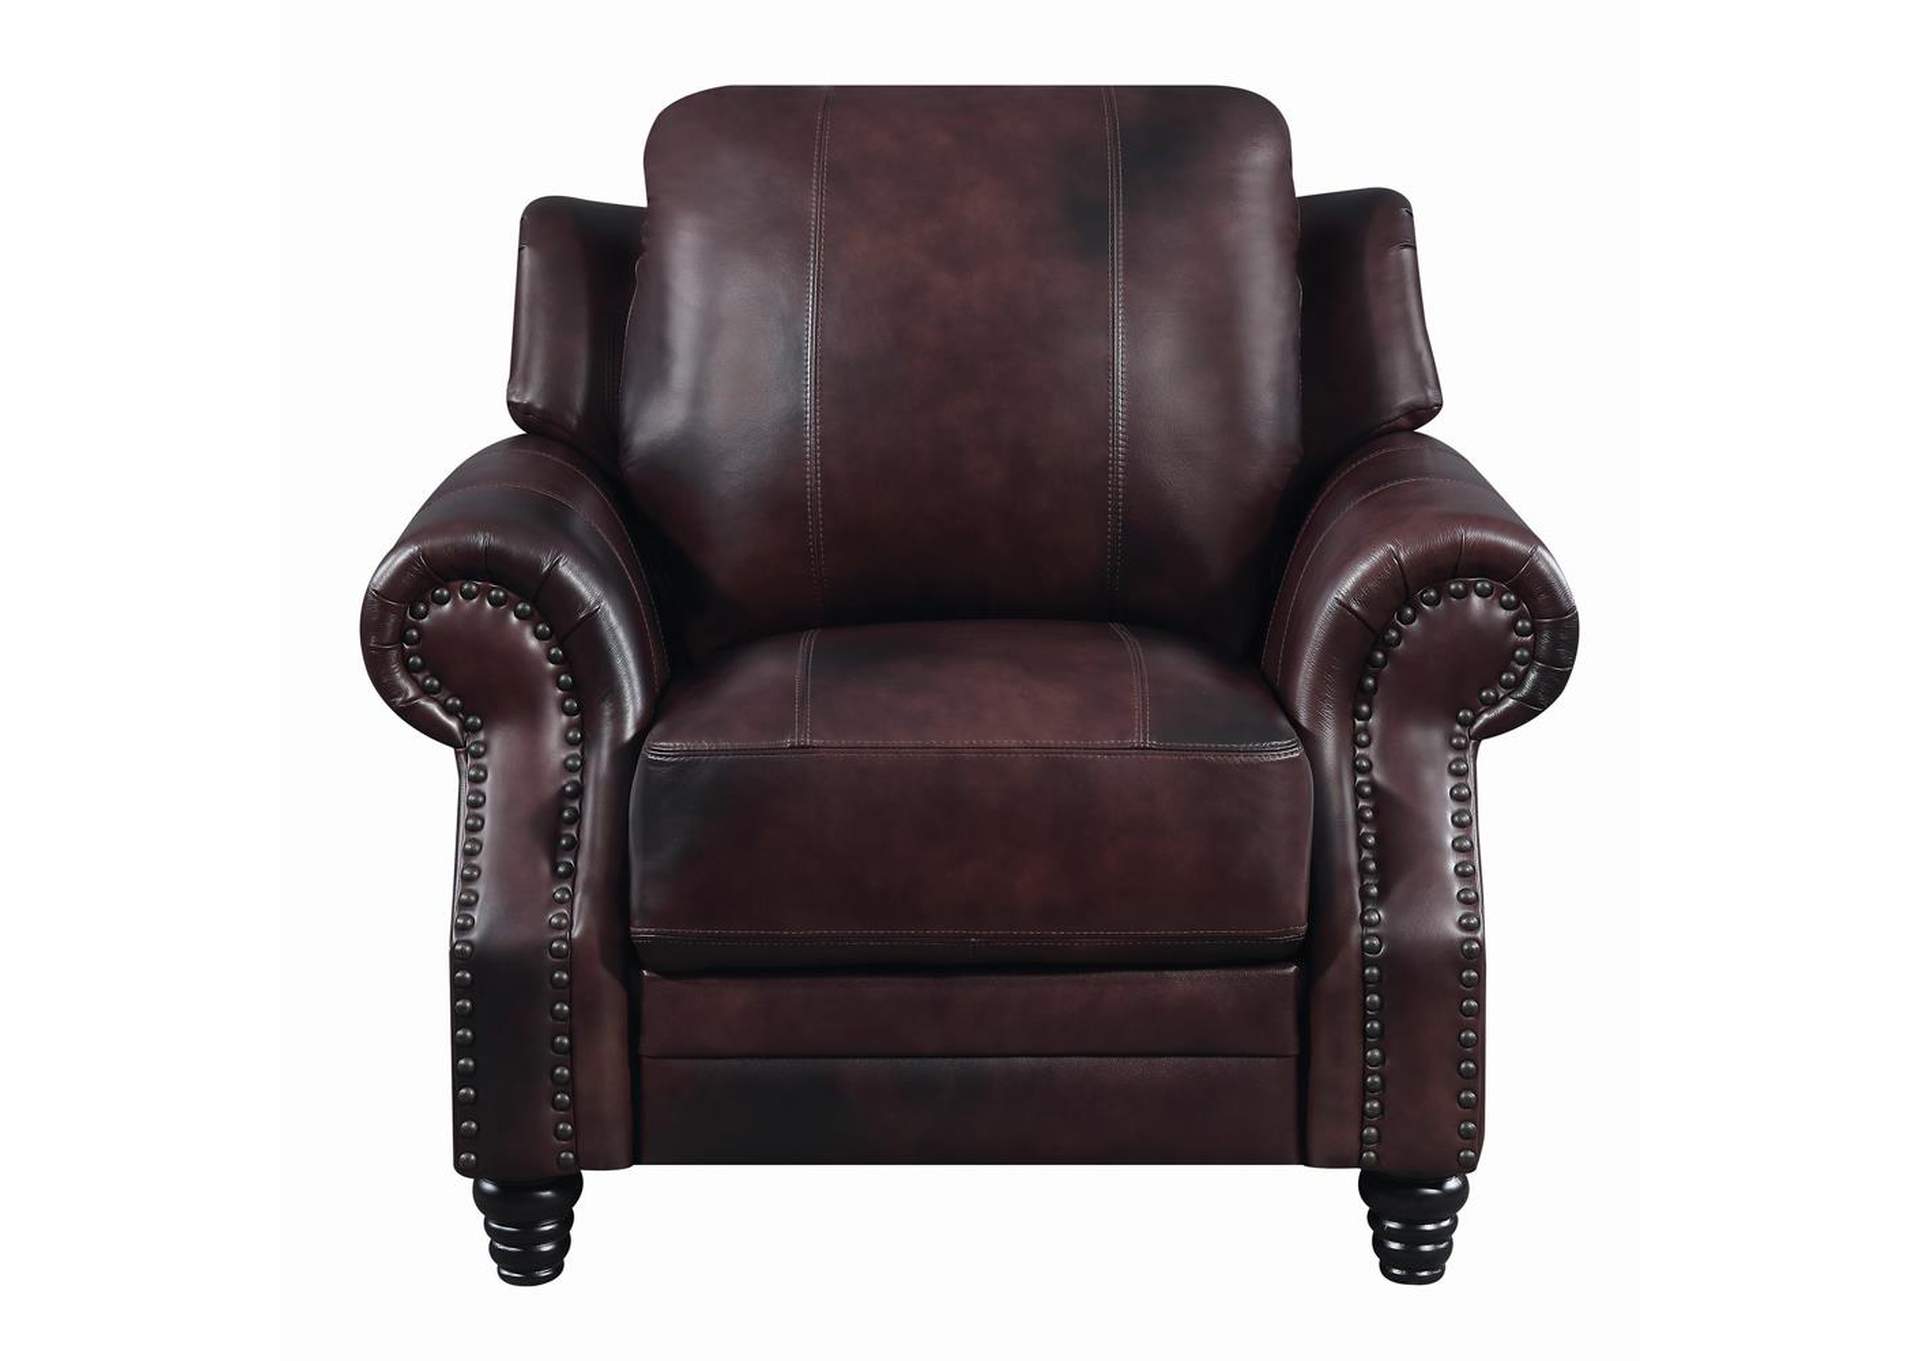 Cocoa Brown Princeton Traditional Burgundy Push Back Recliner,Coaster Furniture